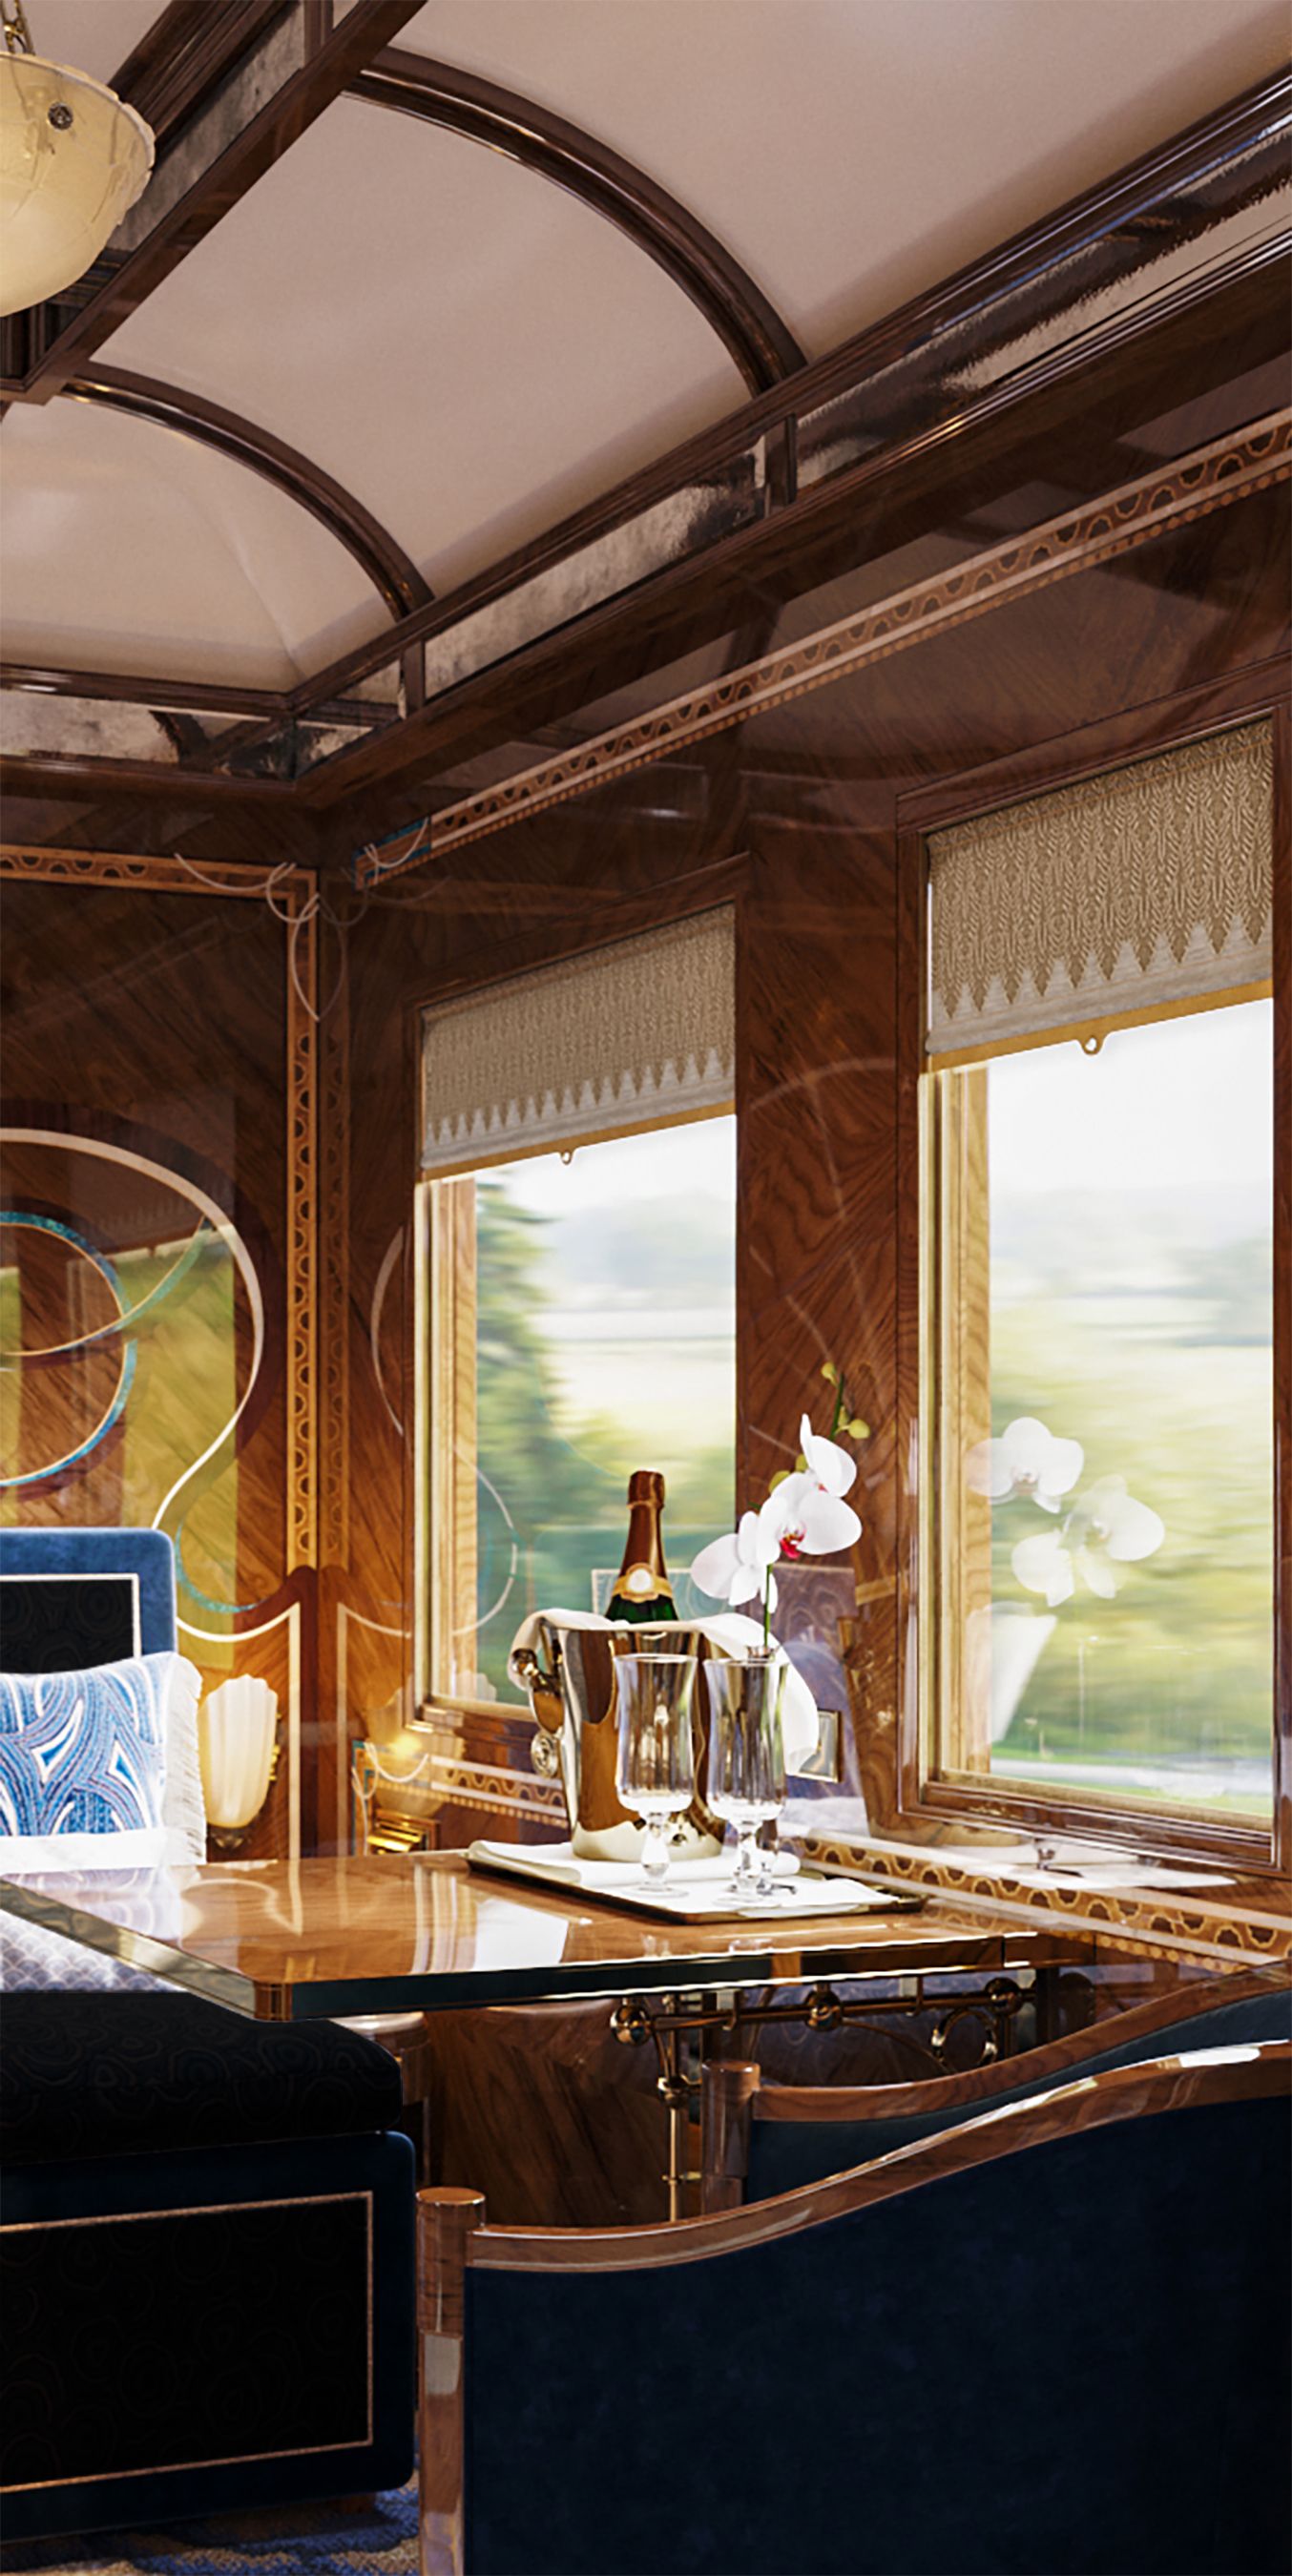 The Venice Simplon-Orient-Express: See Inside Europe's Most Swoon